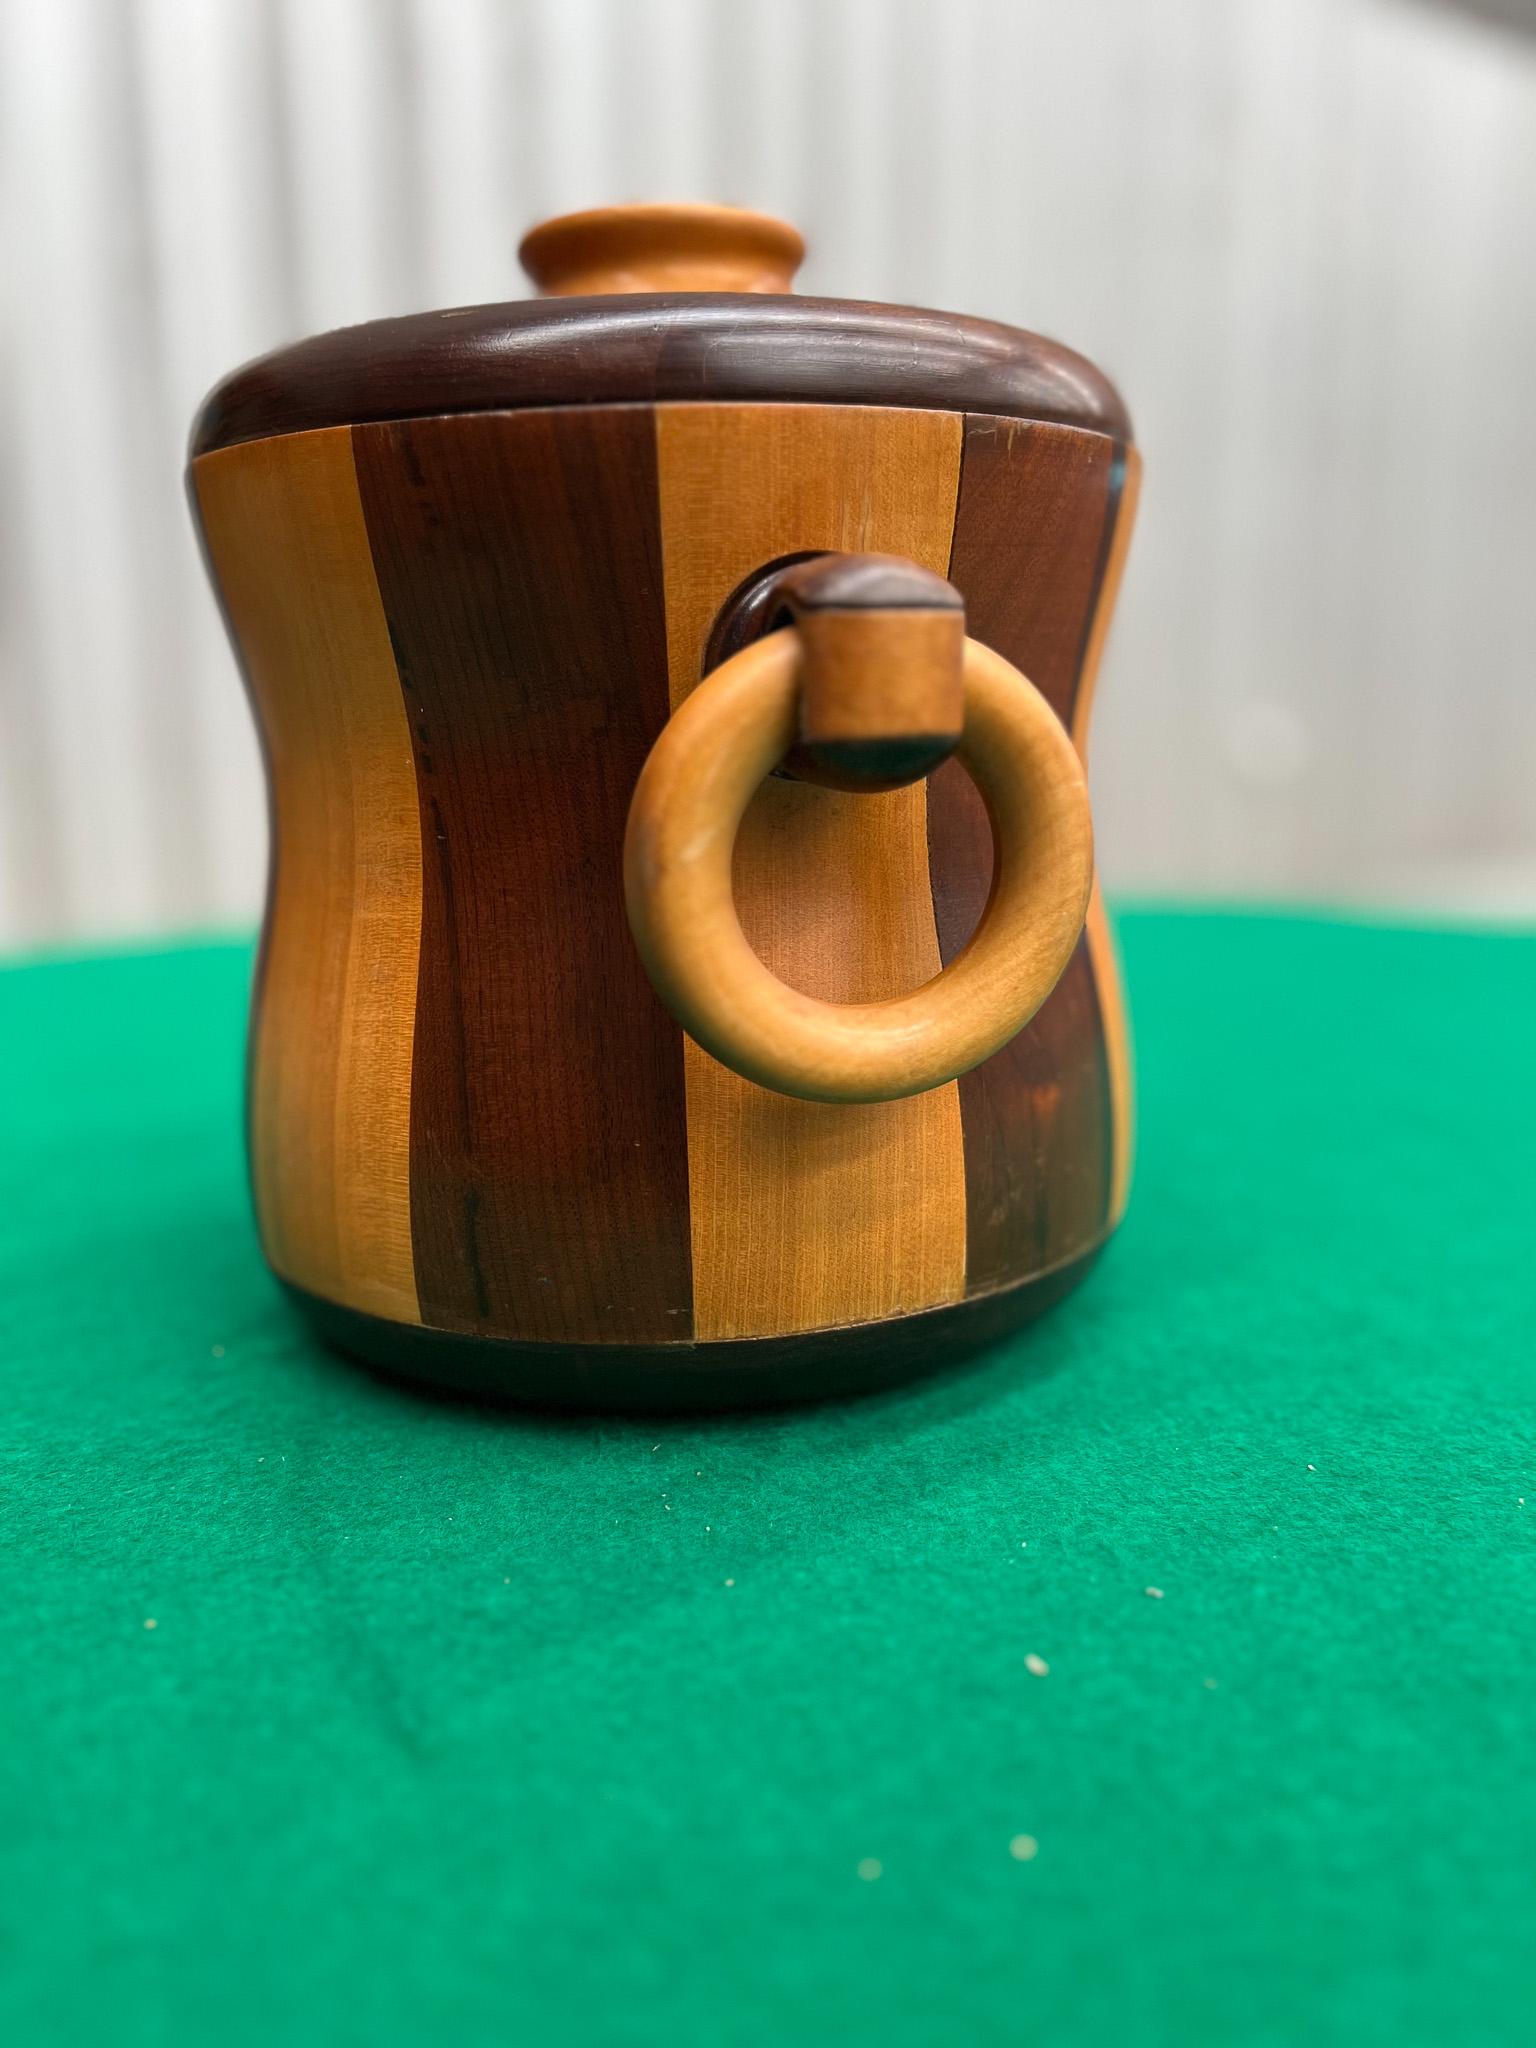 Available today, this mid-century modern ice bucket that was made in the sixties is one of a kind! This beautiful wooden ice bucket is made with imbuia hardwood and Brazilian rosewood (also known as Jacaranda), and has two rounded handles on the